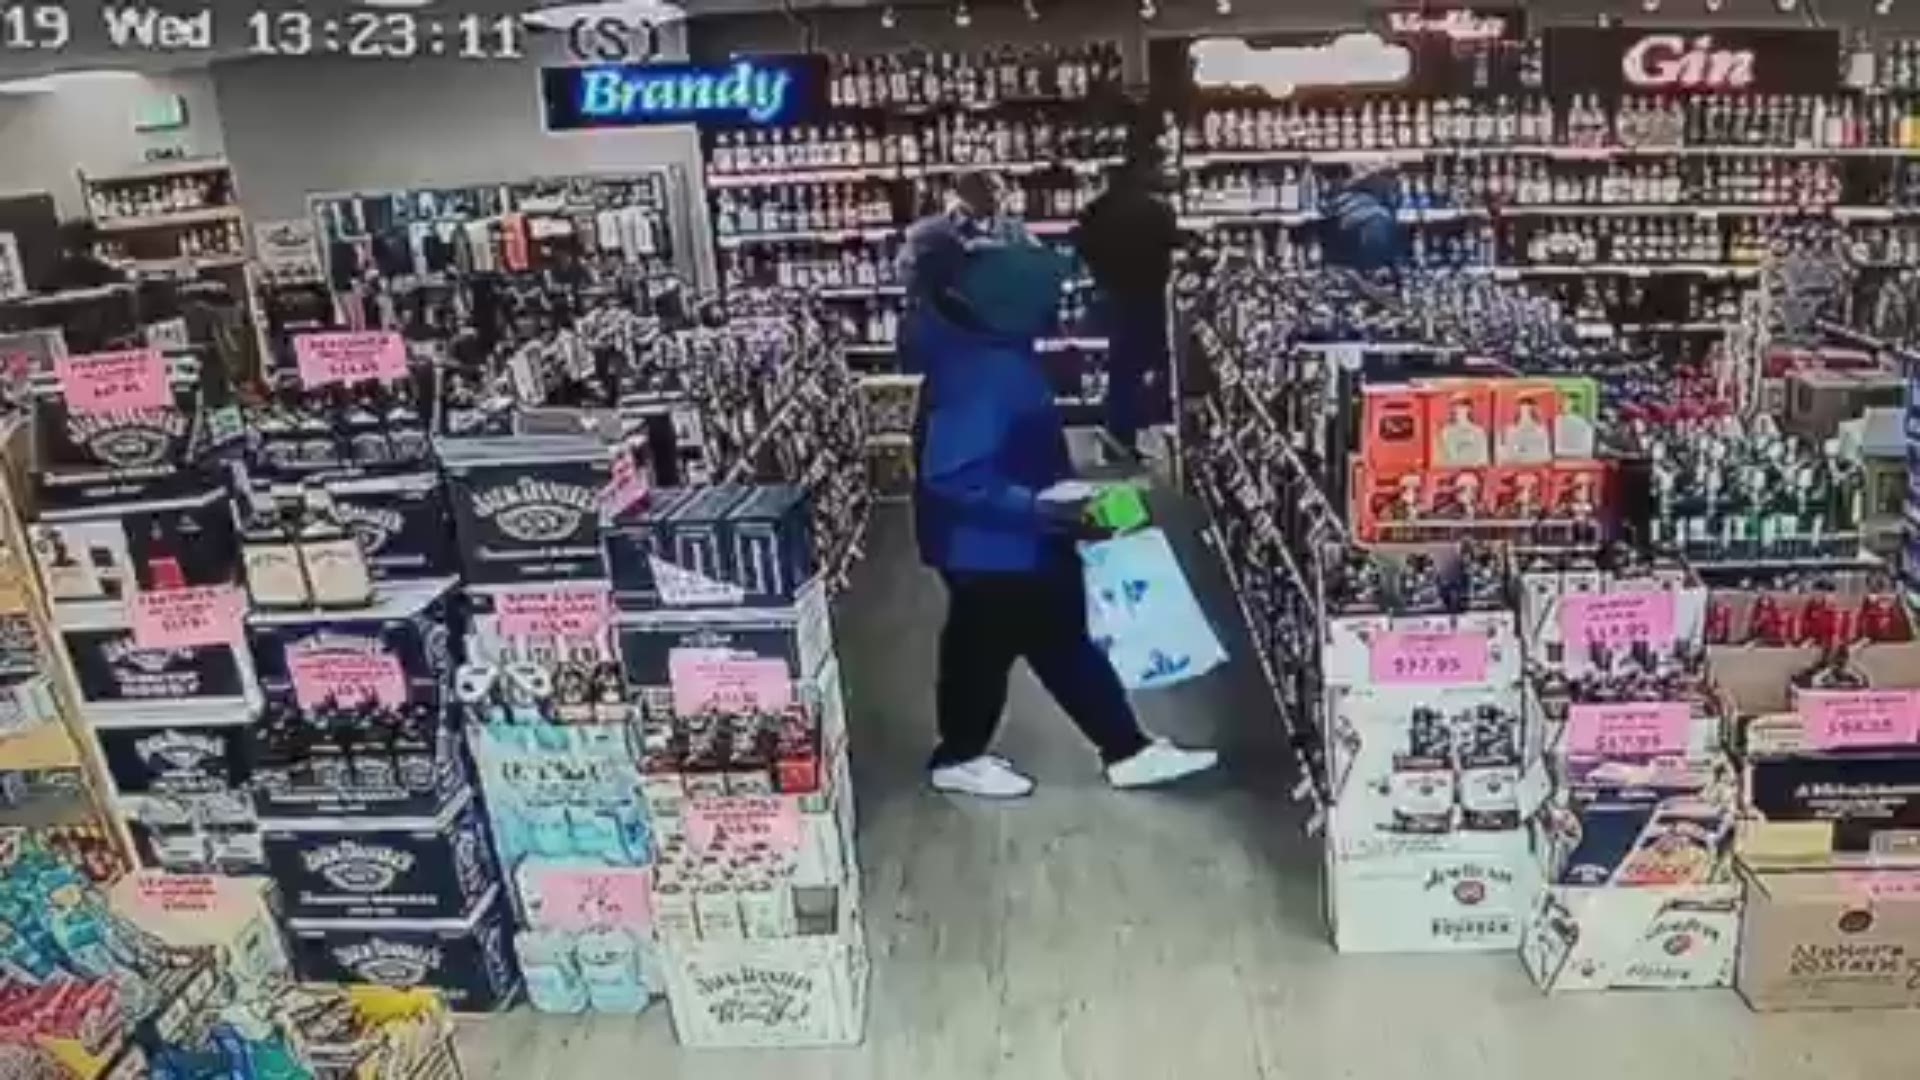 Two shoplifters were caught on camera stealing high priced bottles.